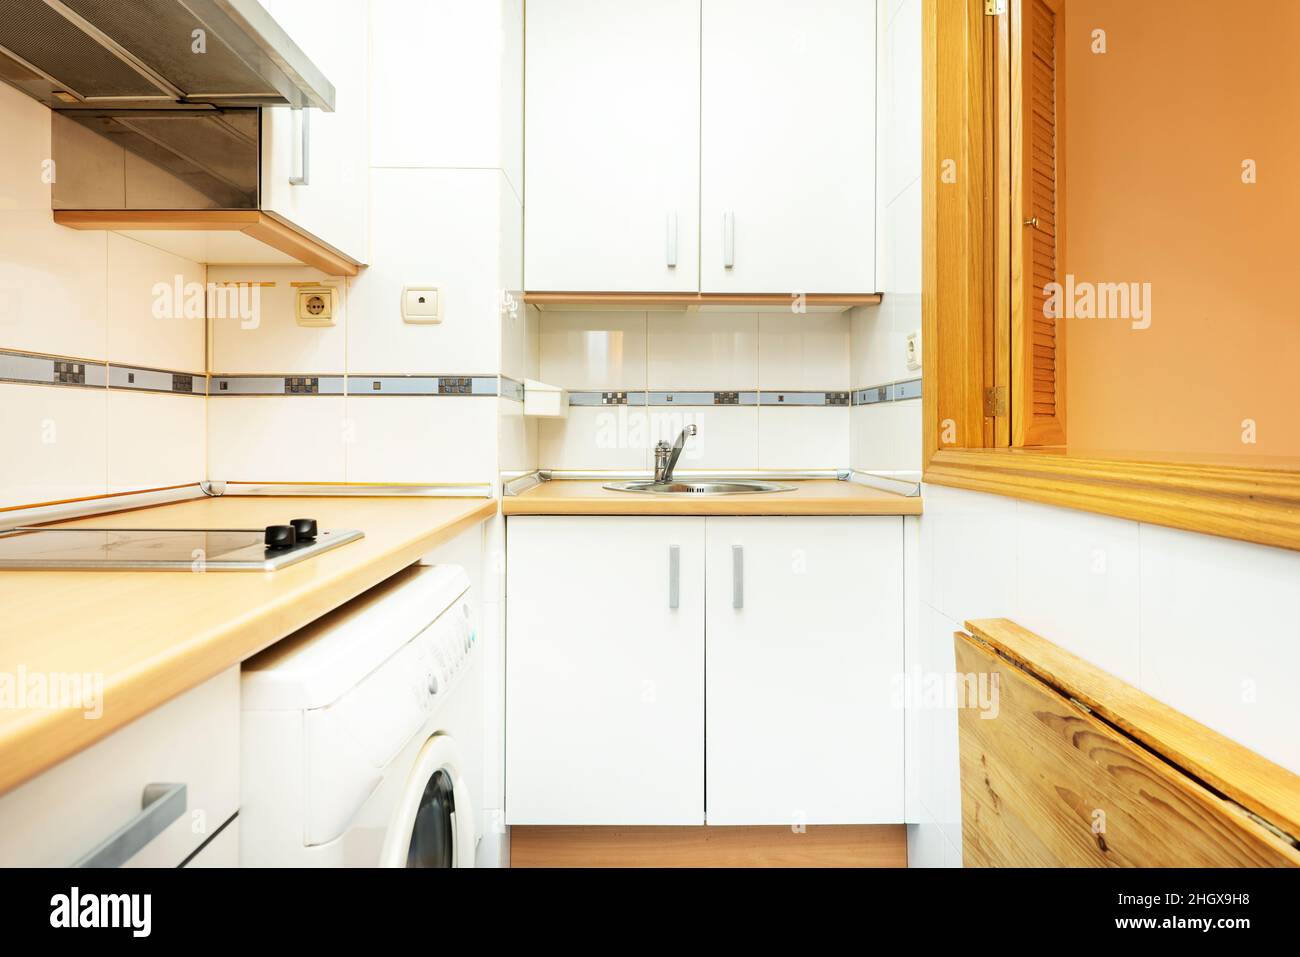 Small wooden drawers, part of wooden furniture in kitchen Stock Photo -  Alamy